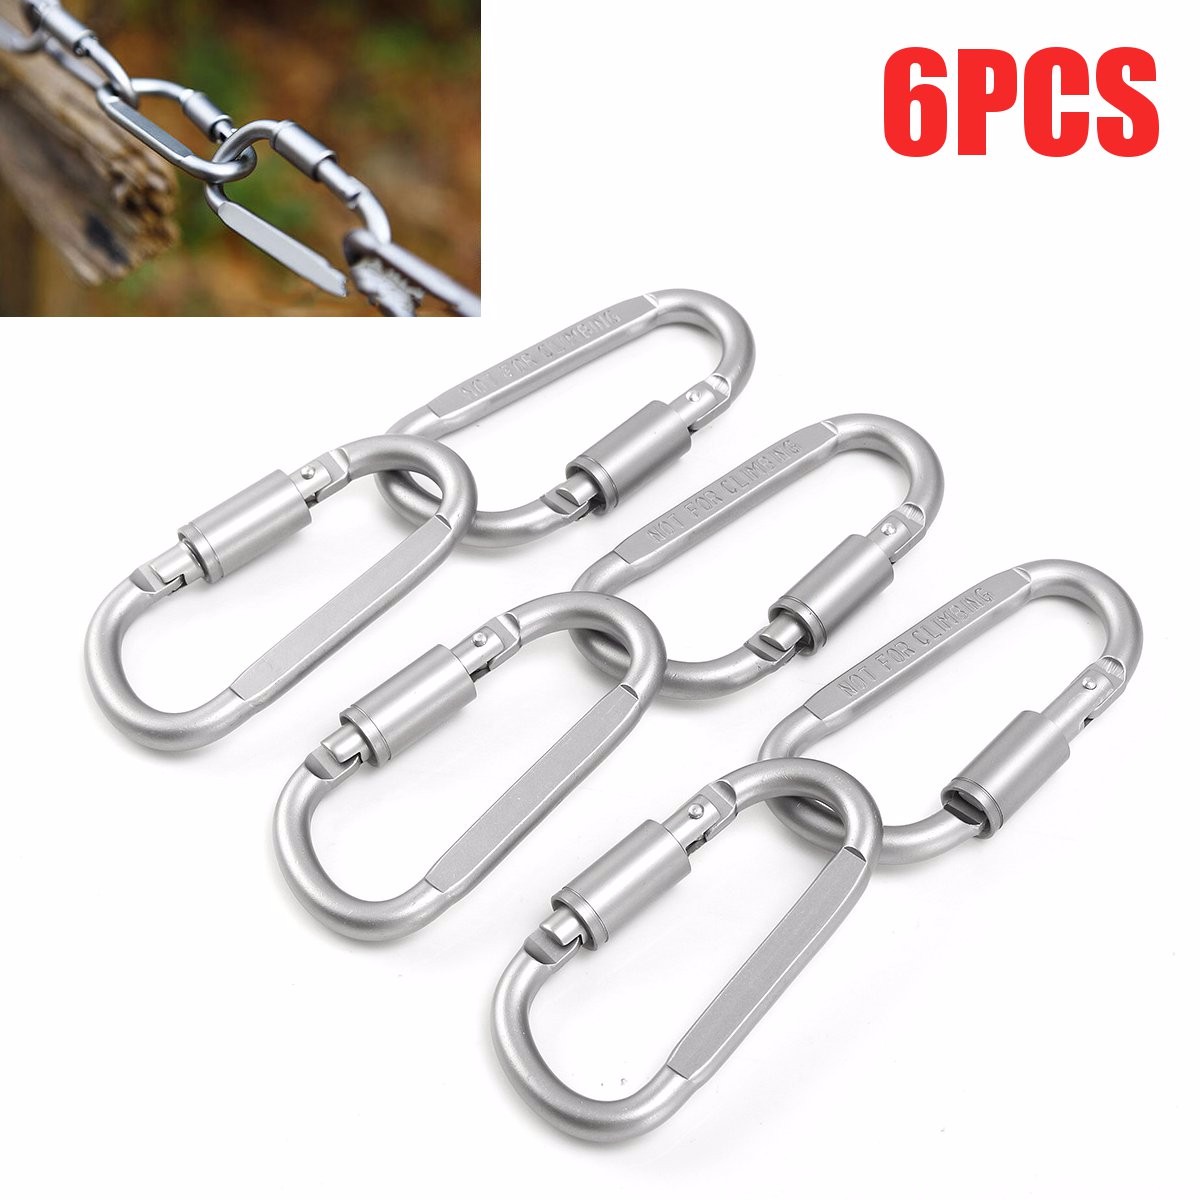 

6Pcs Aluminum D-Ring Key Chain Clip Hook Buckle Outdoor Camping Hiking Tools